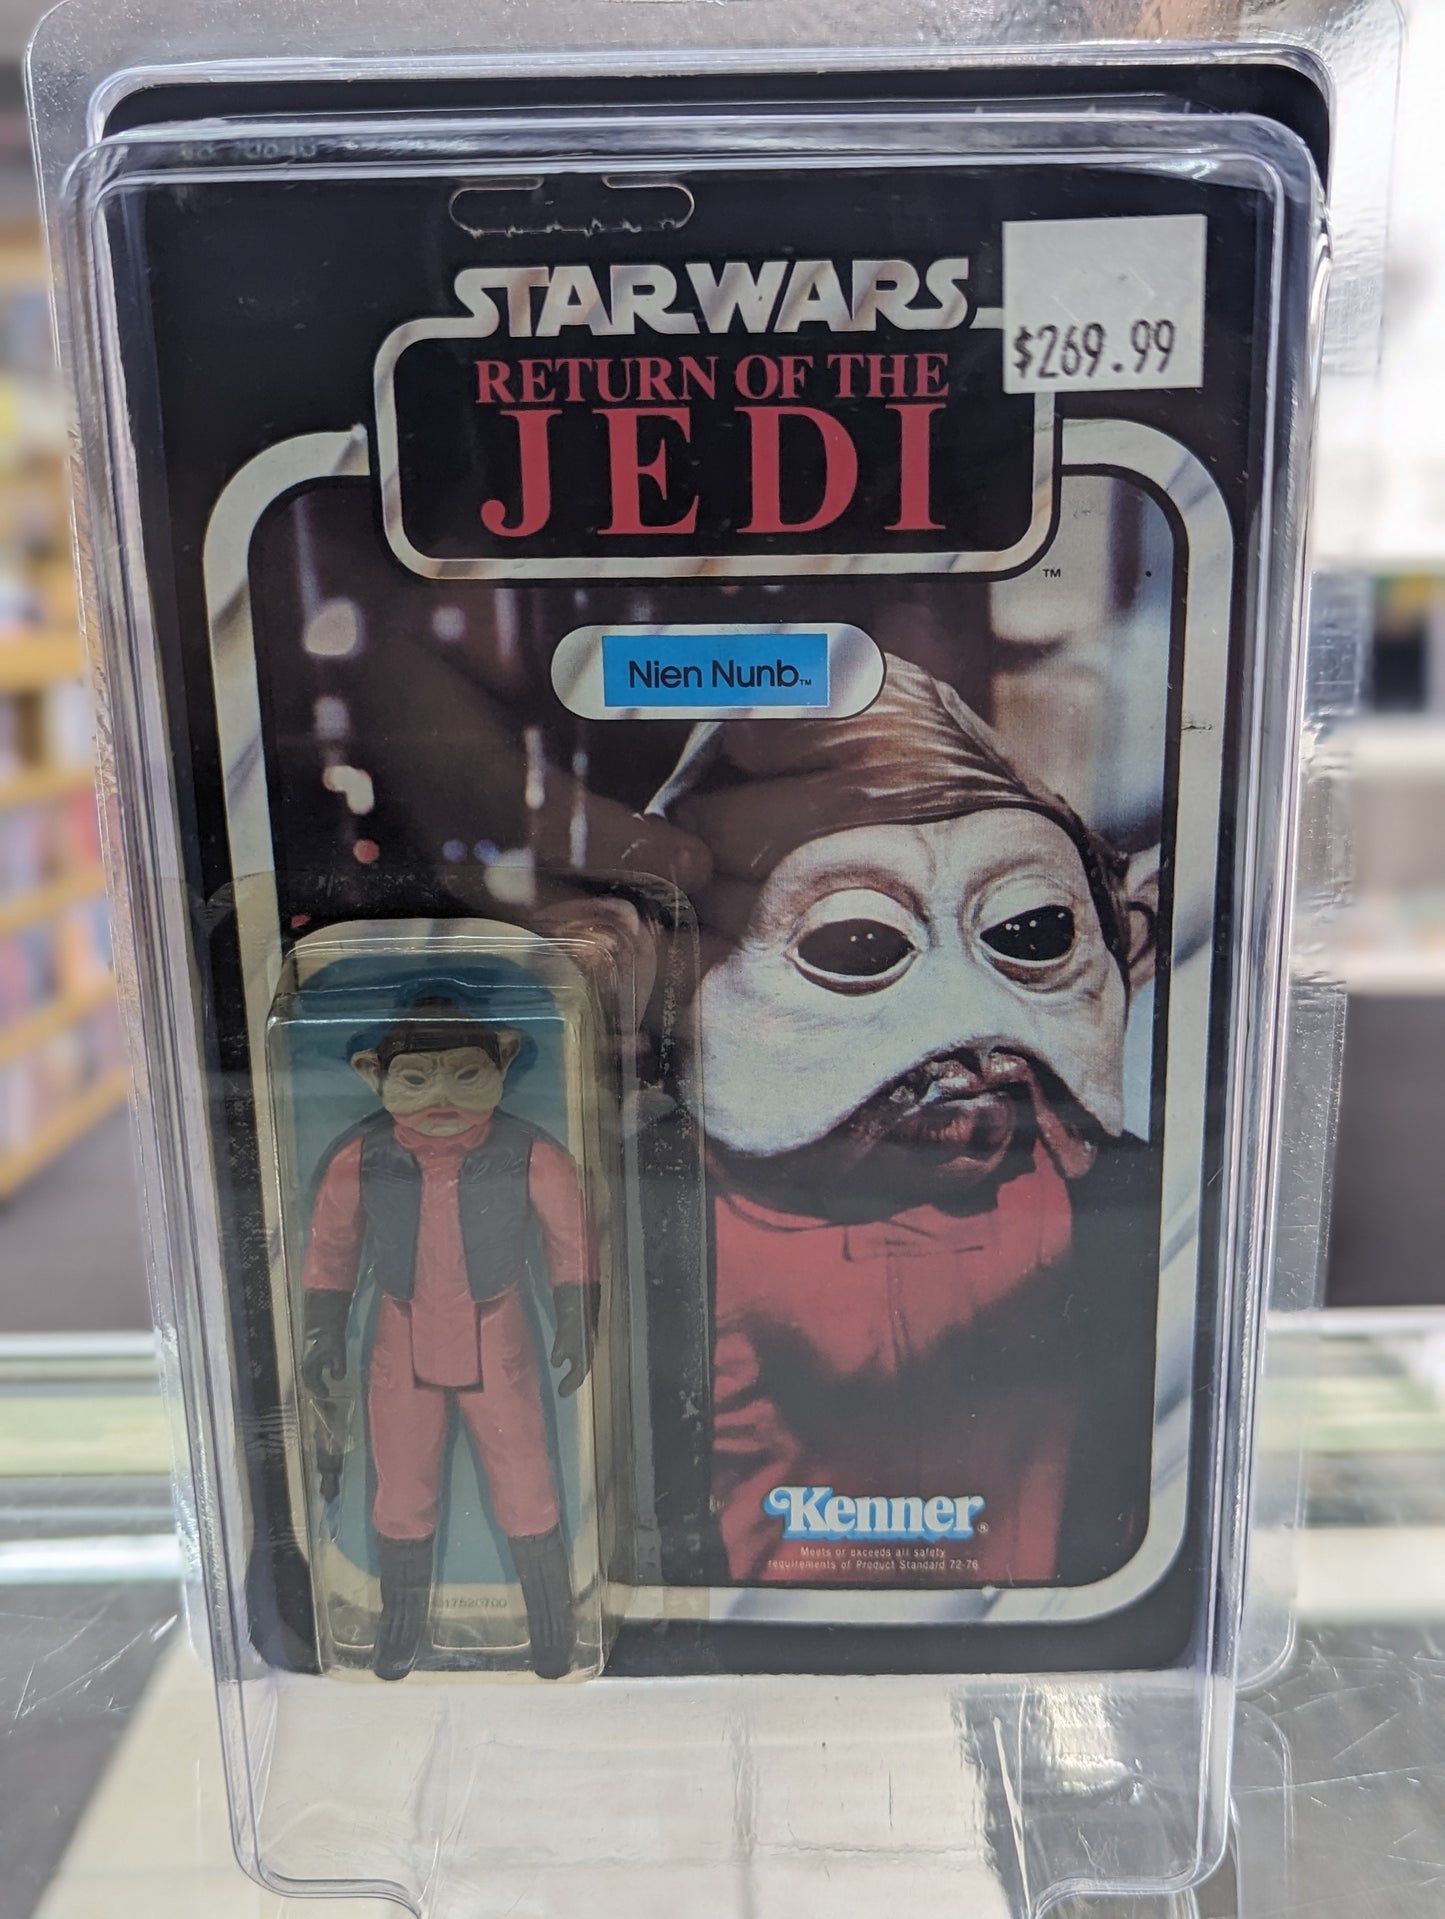 Star Wars Return of the Jedi Carded Nien Nunb Figure - Covert Comics and Collectibles